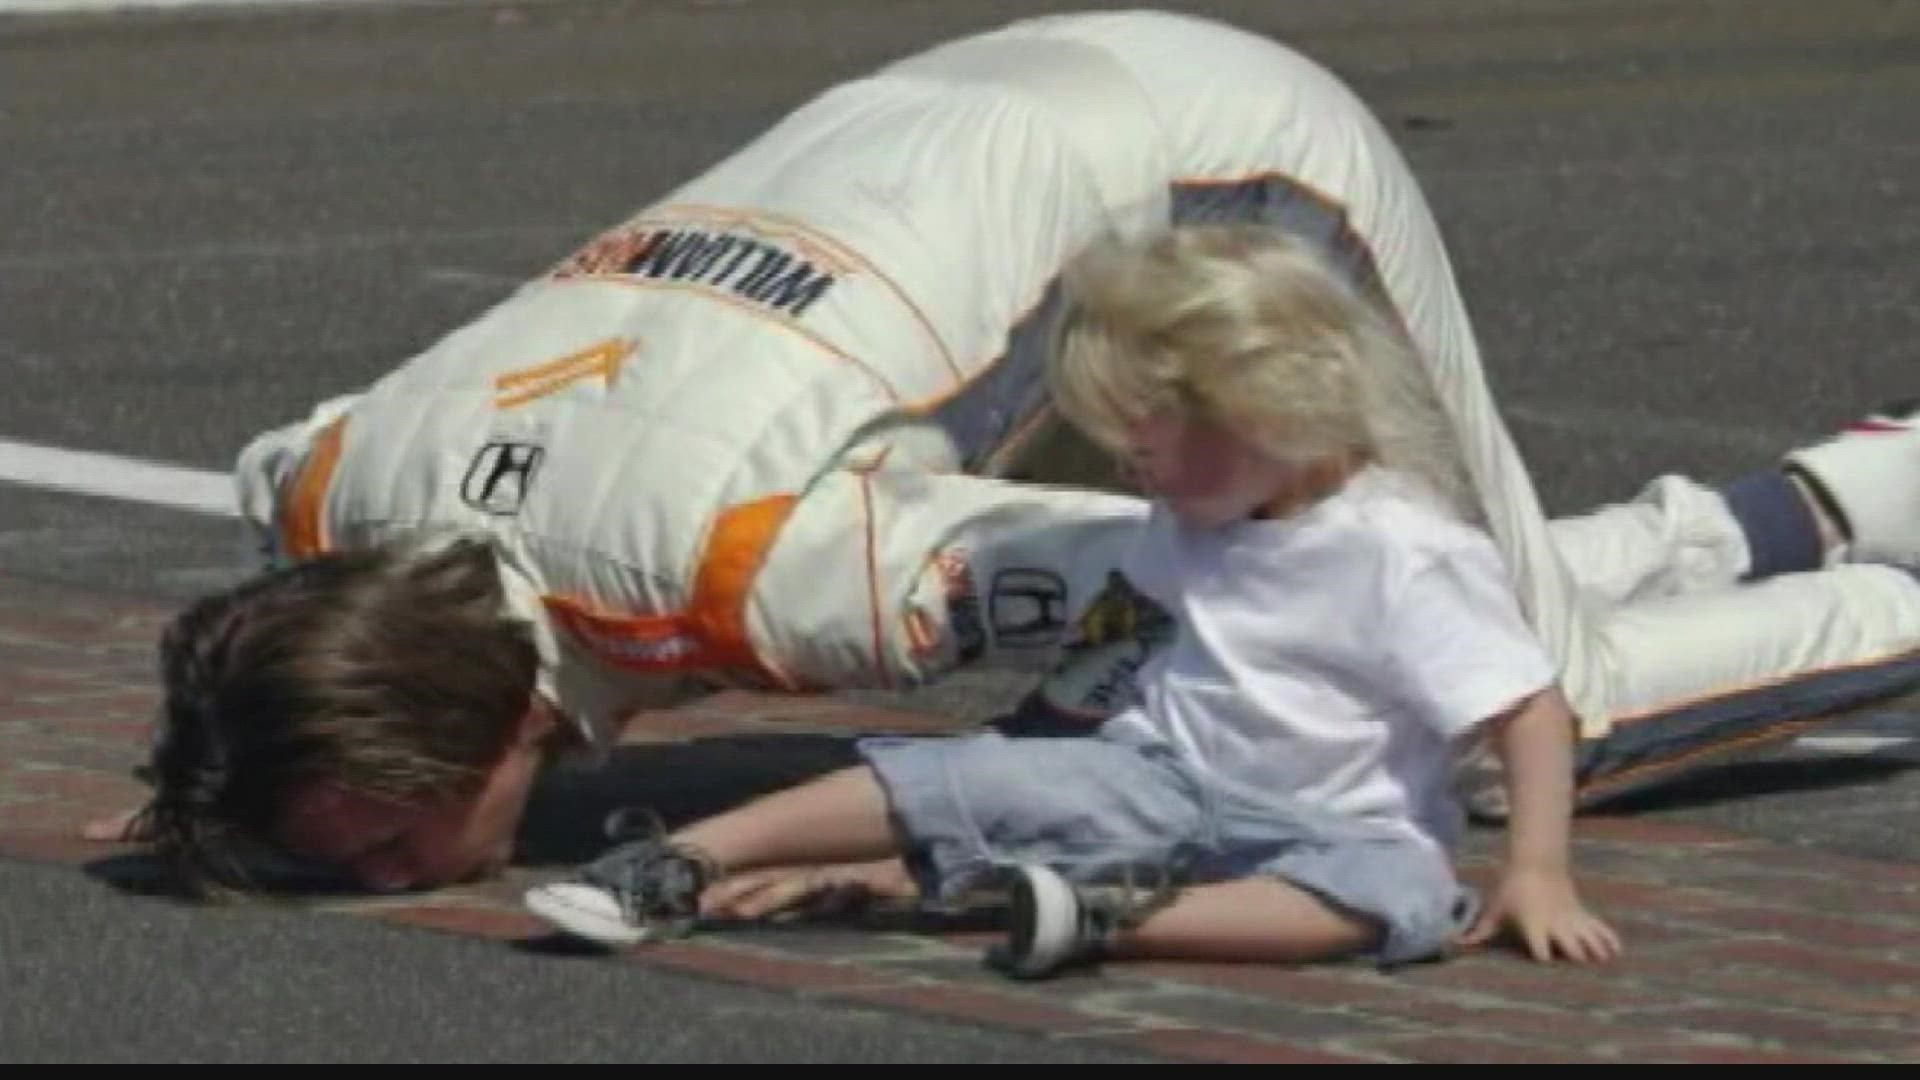 Today,  the boys of the late 500 champion Dan Wheldon took a ceremonial lap to start the week off!